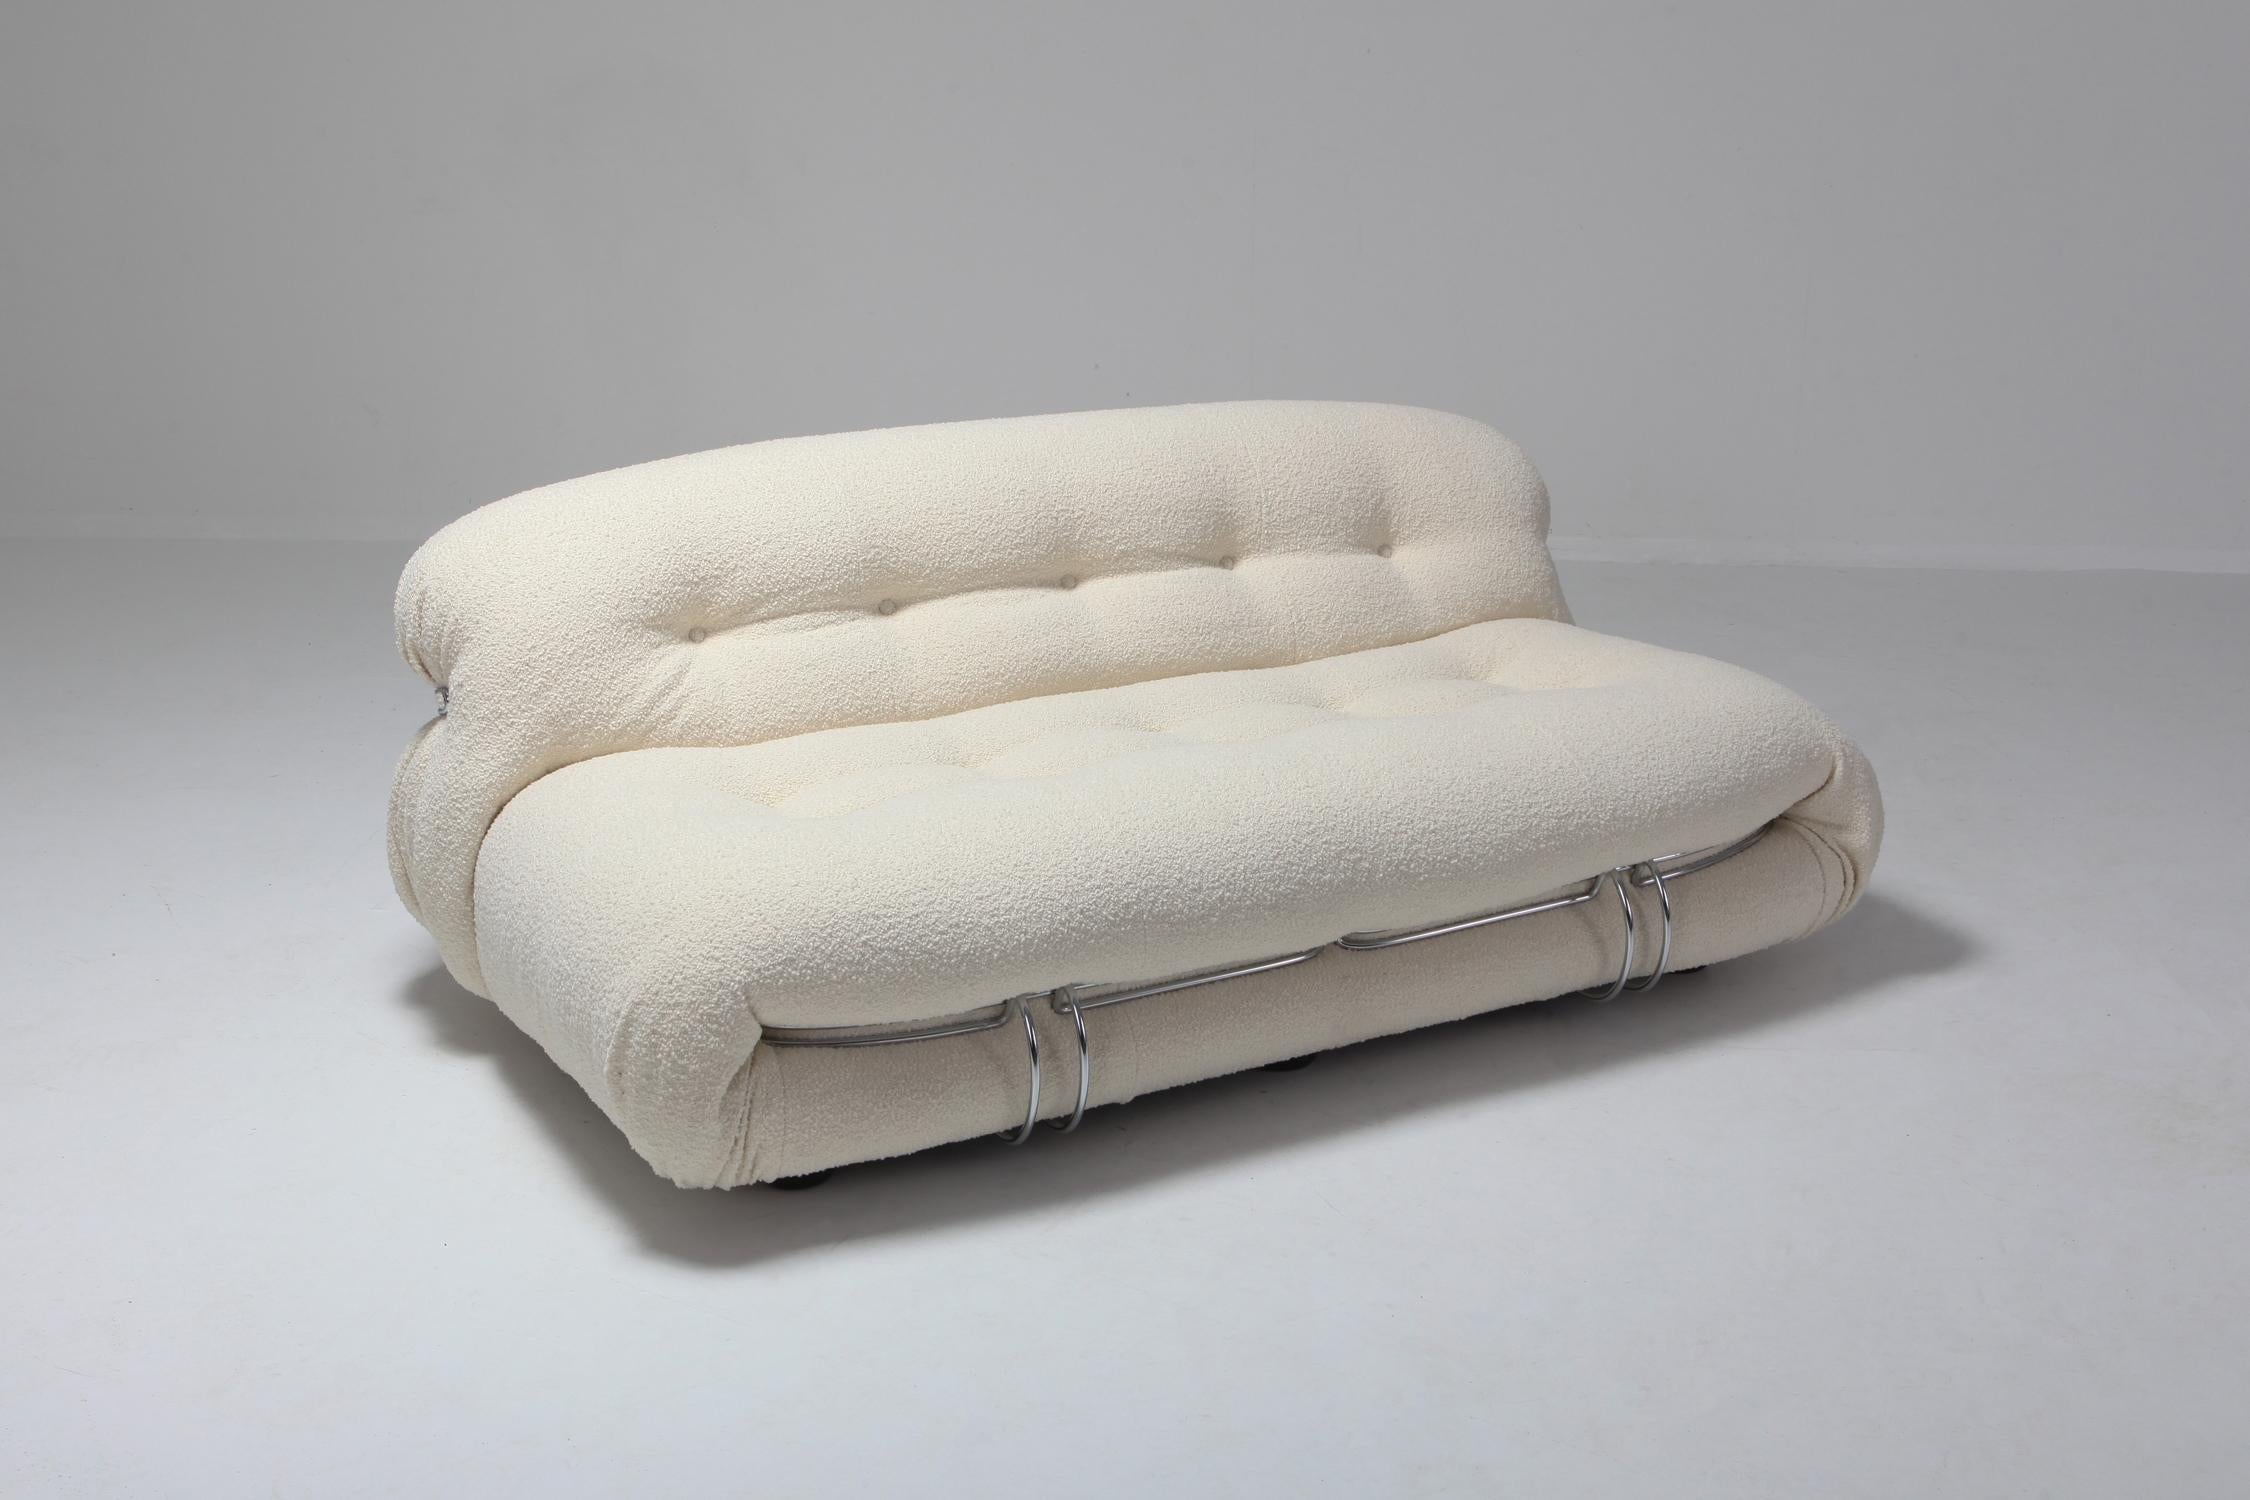 Manufactured by Cassina in the 1970s, the Soriana collection was meant to express beauty and comfort by using a whole bundle of fabric held by a chrome-plated steel clamp.
Reupholstered in ivory bouclé wool.
The 